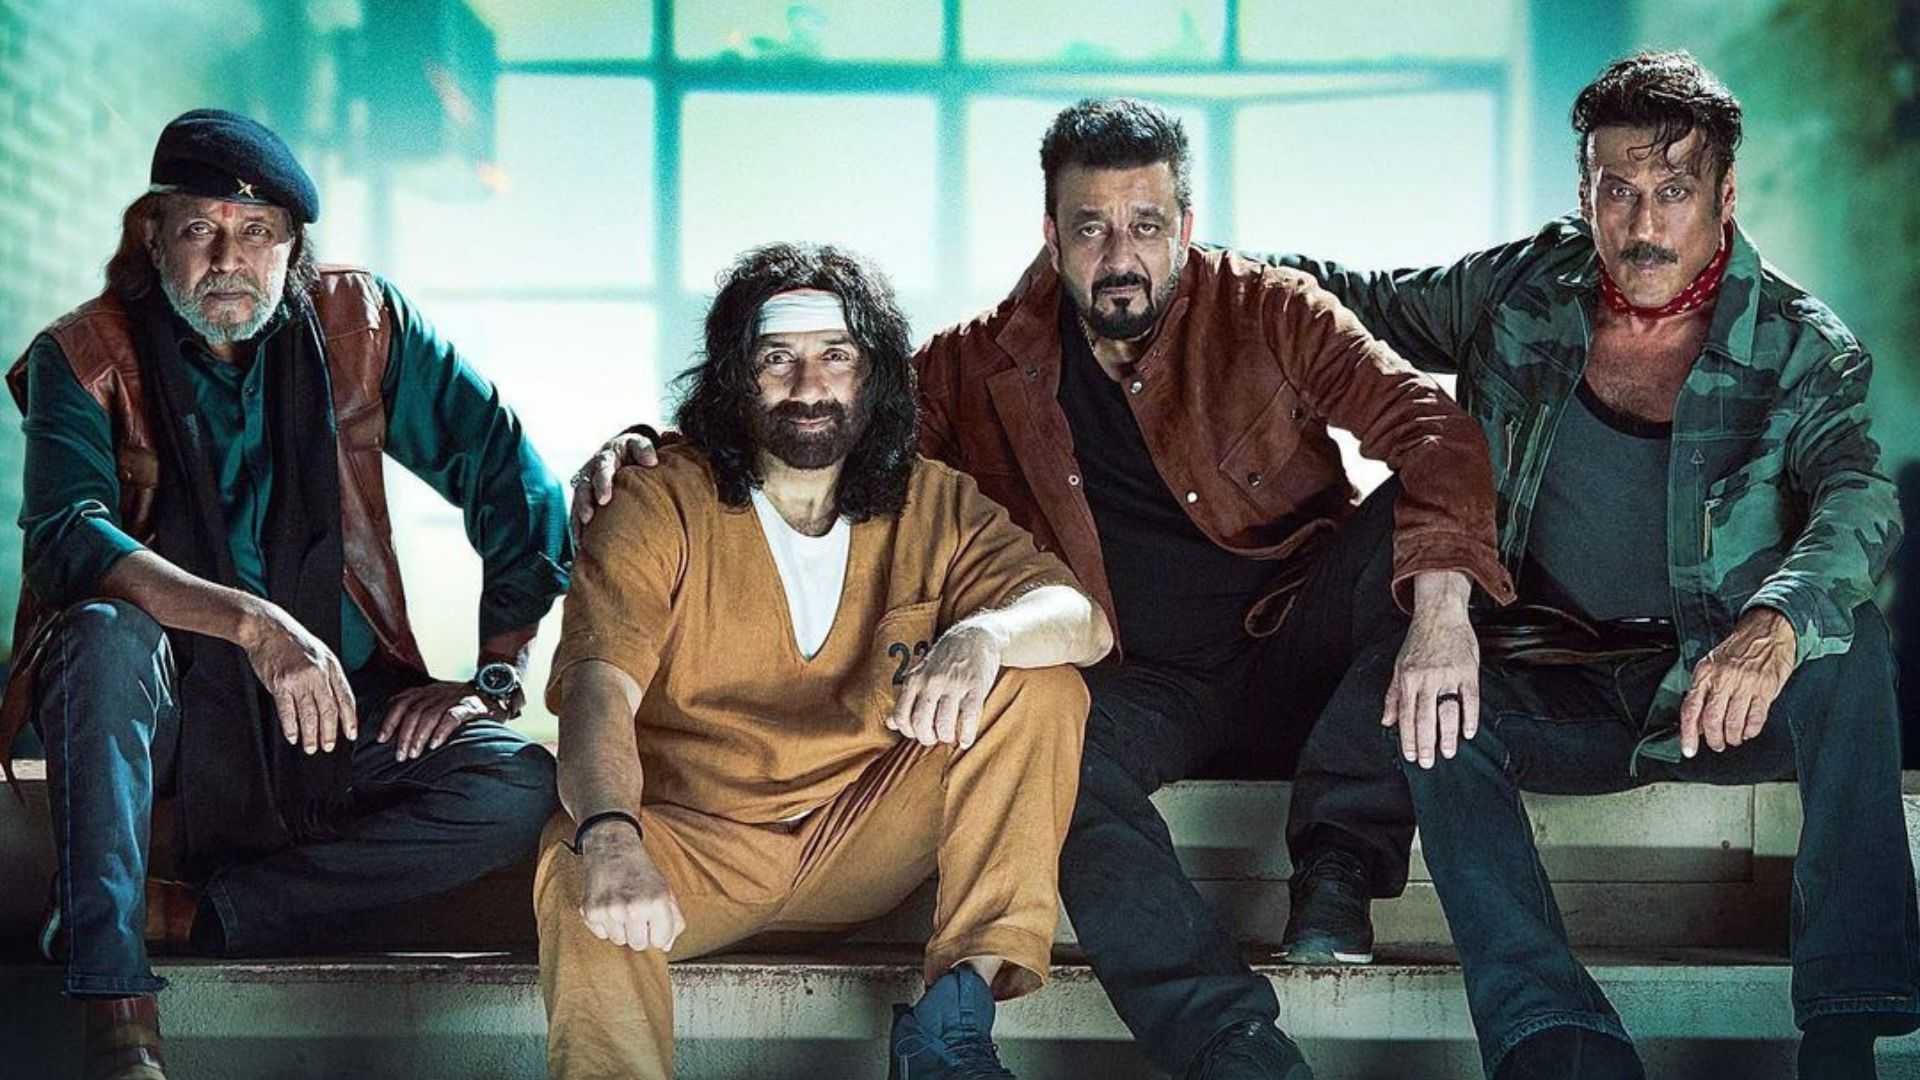 'Too much swag and machoism in one frame': Jackie Shroff, Sanjay Dutt, Sunny Deol & Mithun uniting for action film excites fans